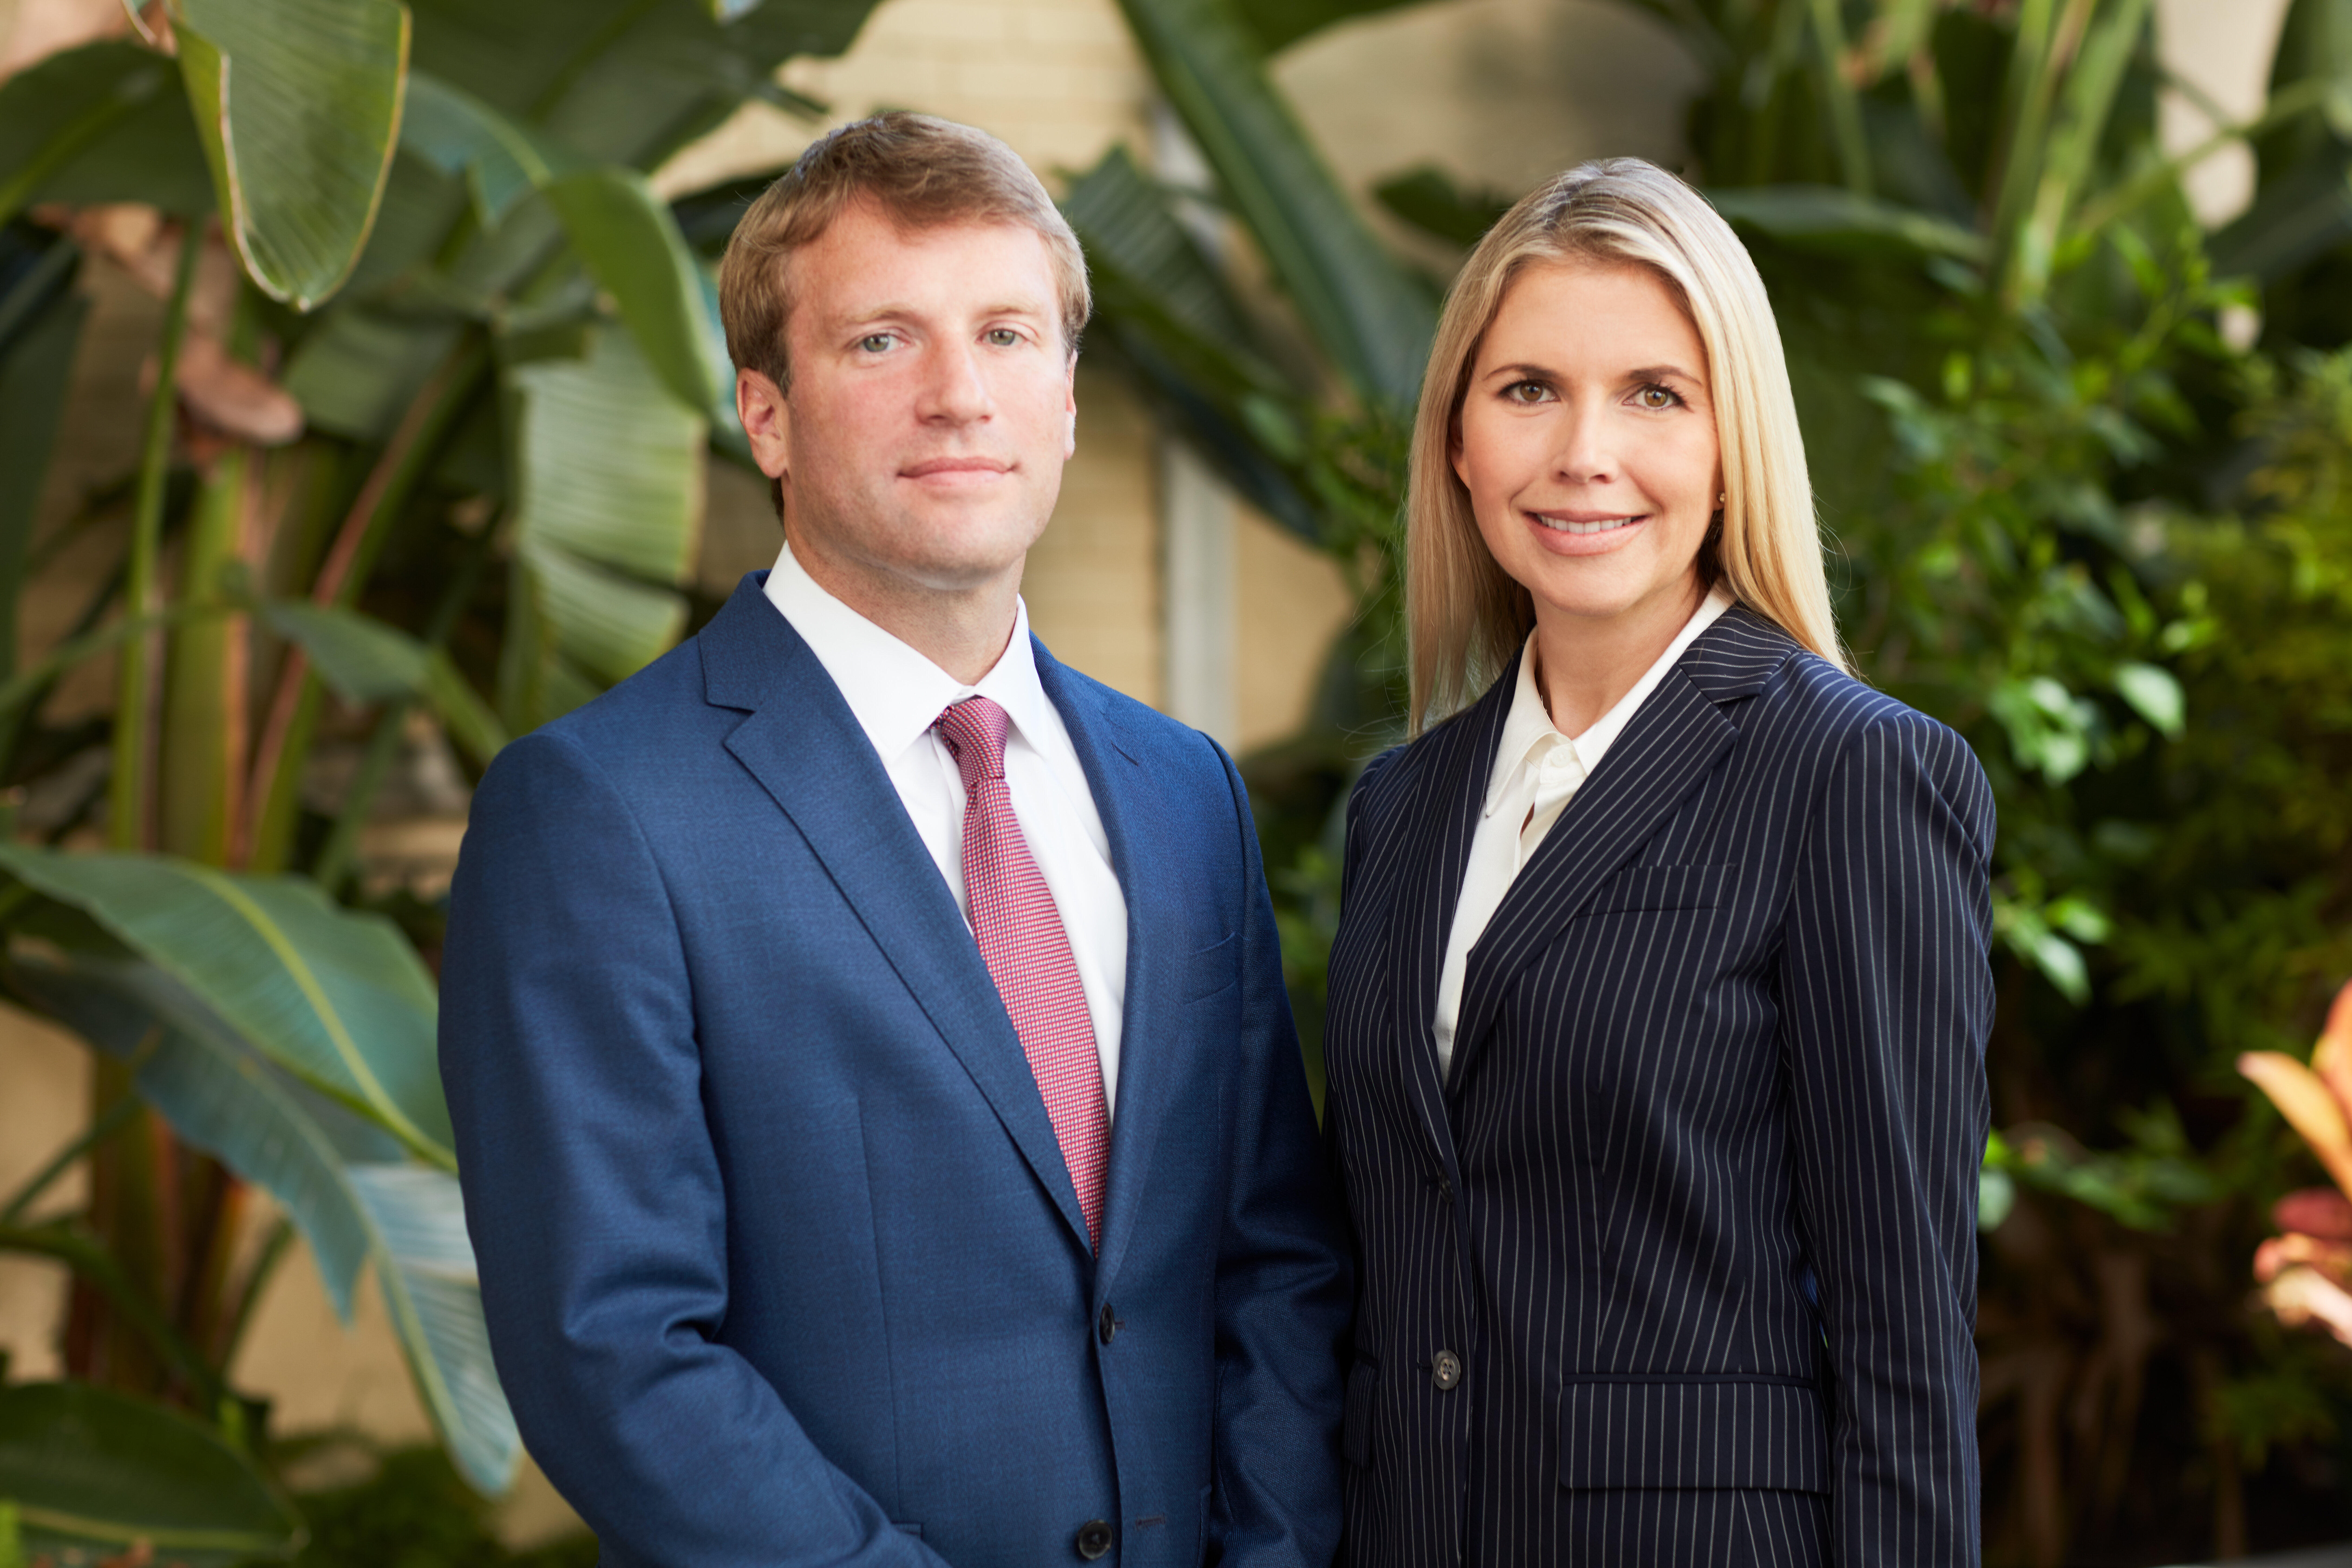 Kibbey Wagner, PLLC - Personal injury lawyers in Port St. Lucie